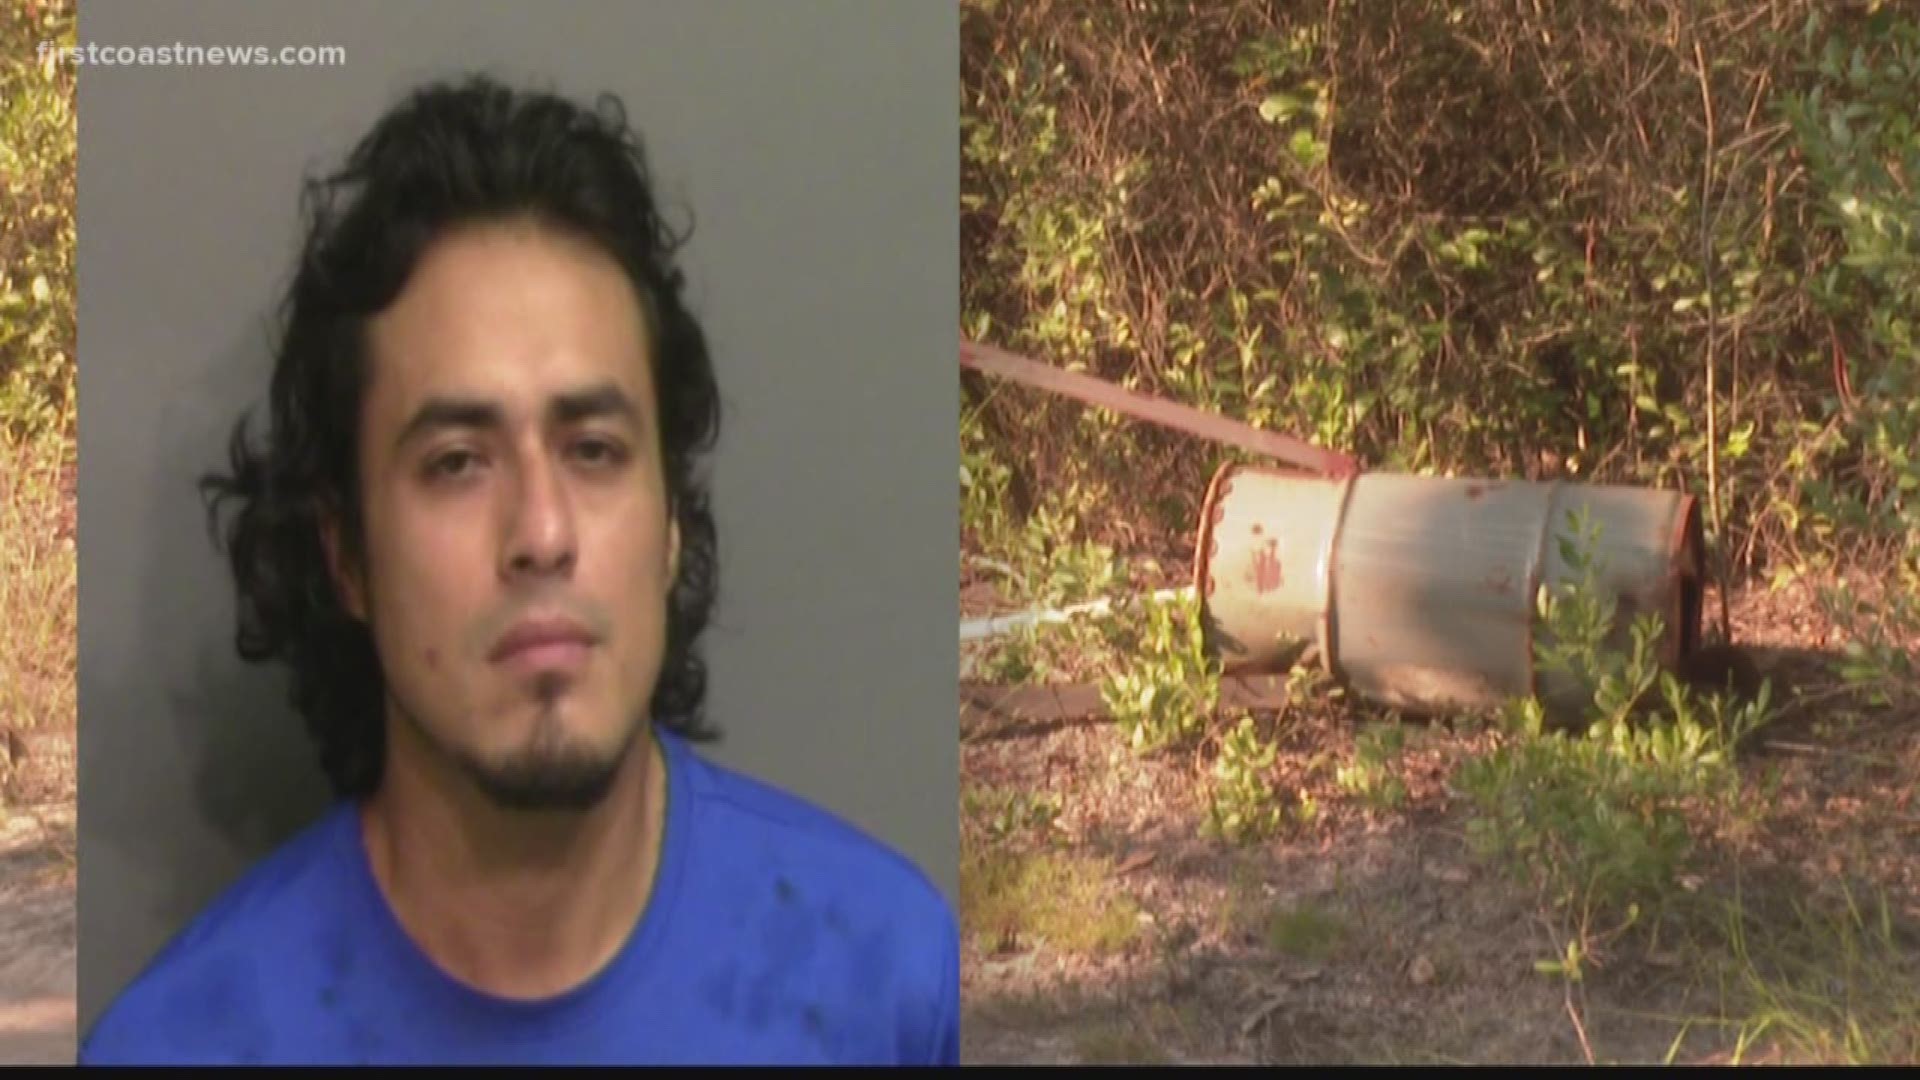 Investigators say Romero-Hernandez shot 17-year-old Bobby Lane with a rifle after mistaking him for a deer in the Myers Hill area.